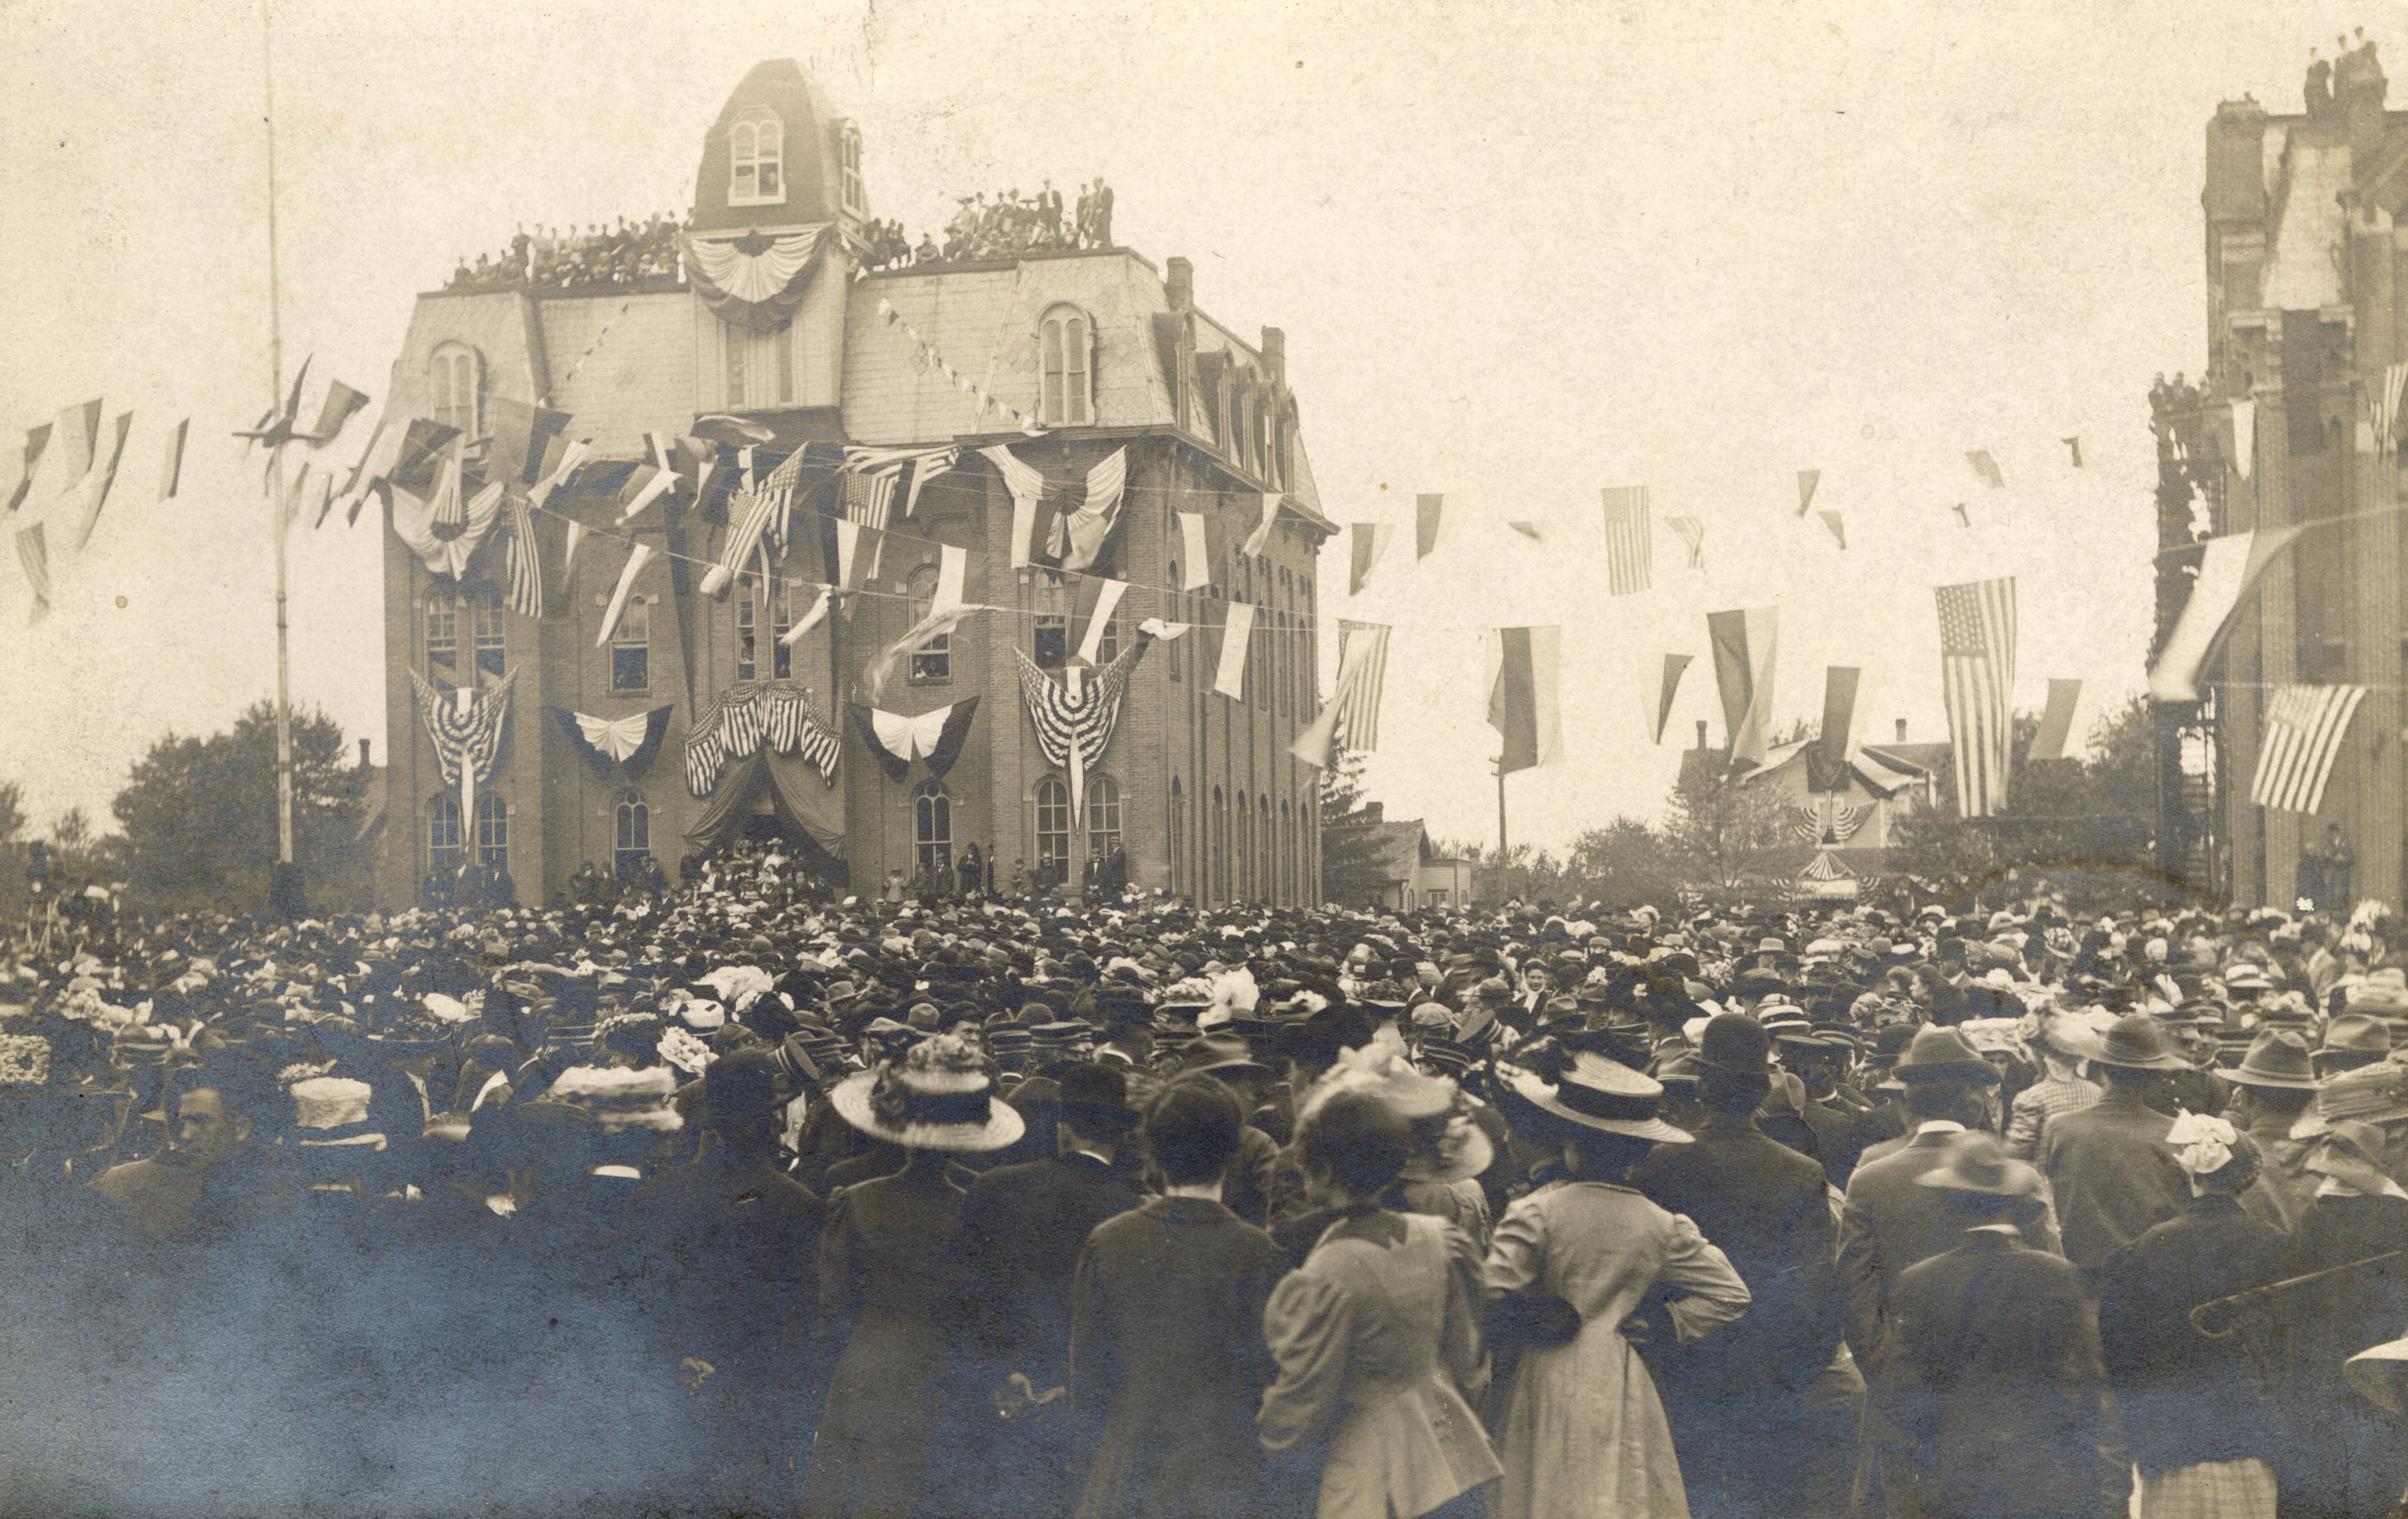 Red, white, and blue banners welcomed President Taft to campus.